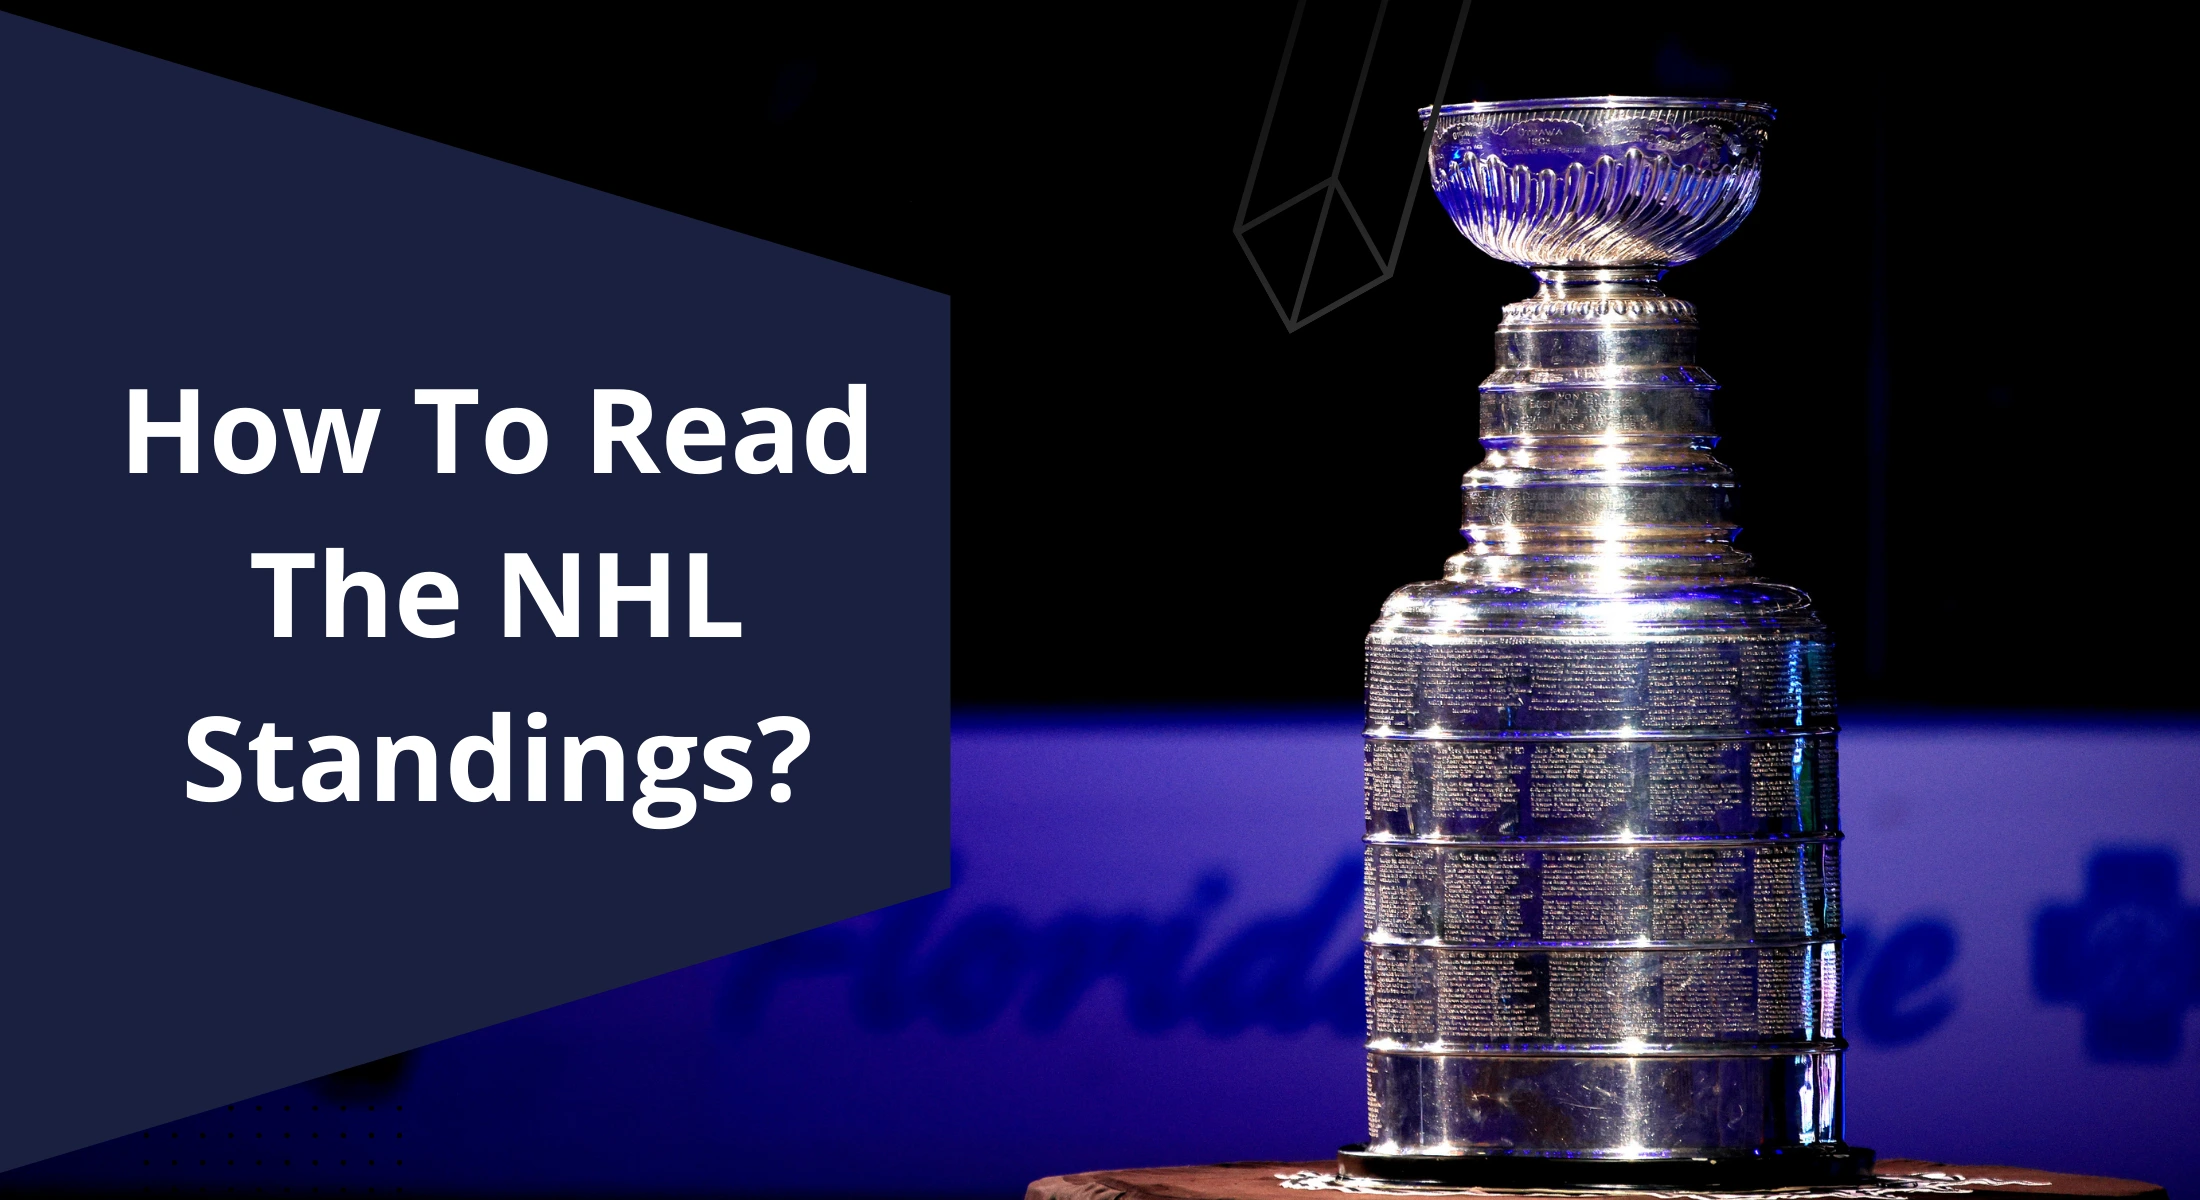 How To Read The NHL Standings